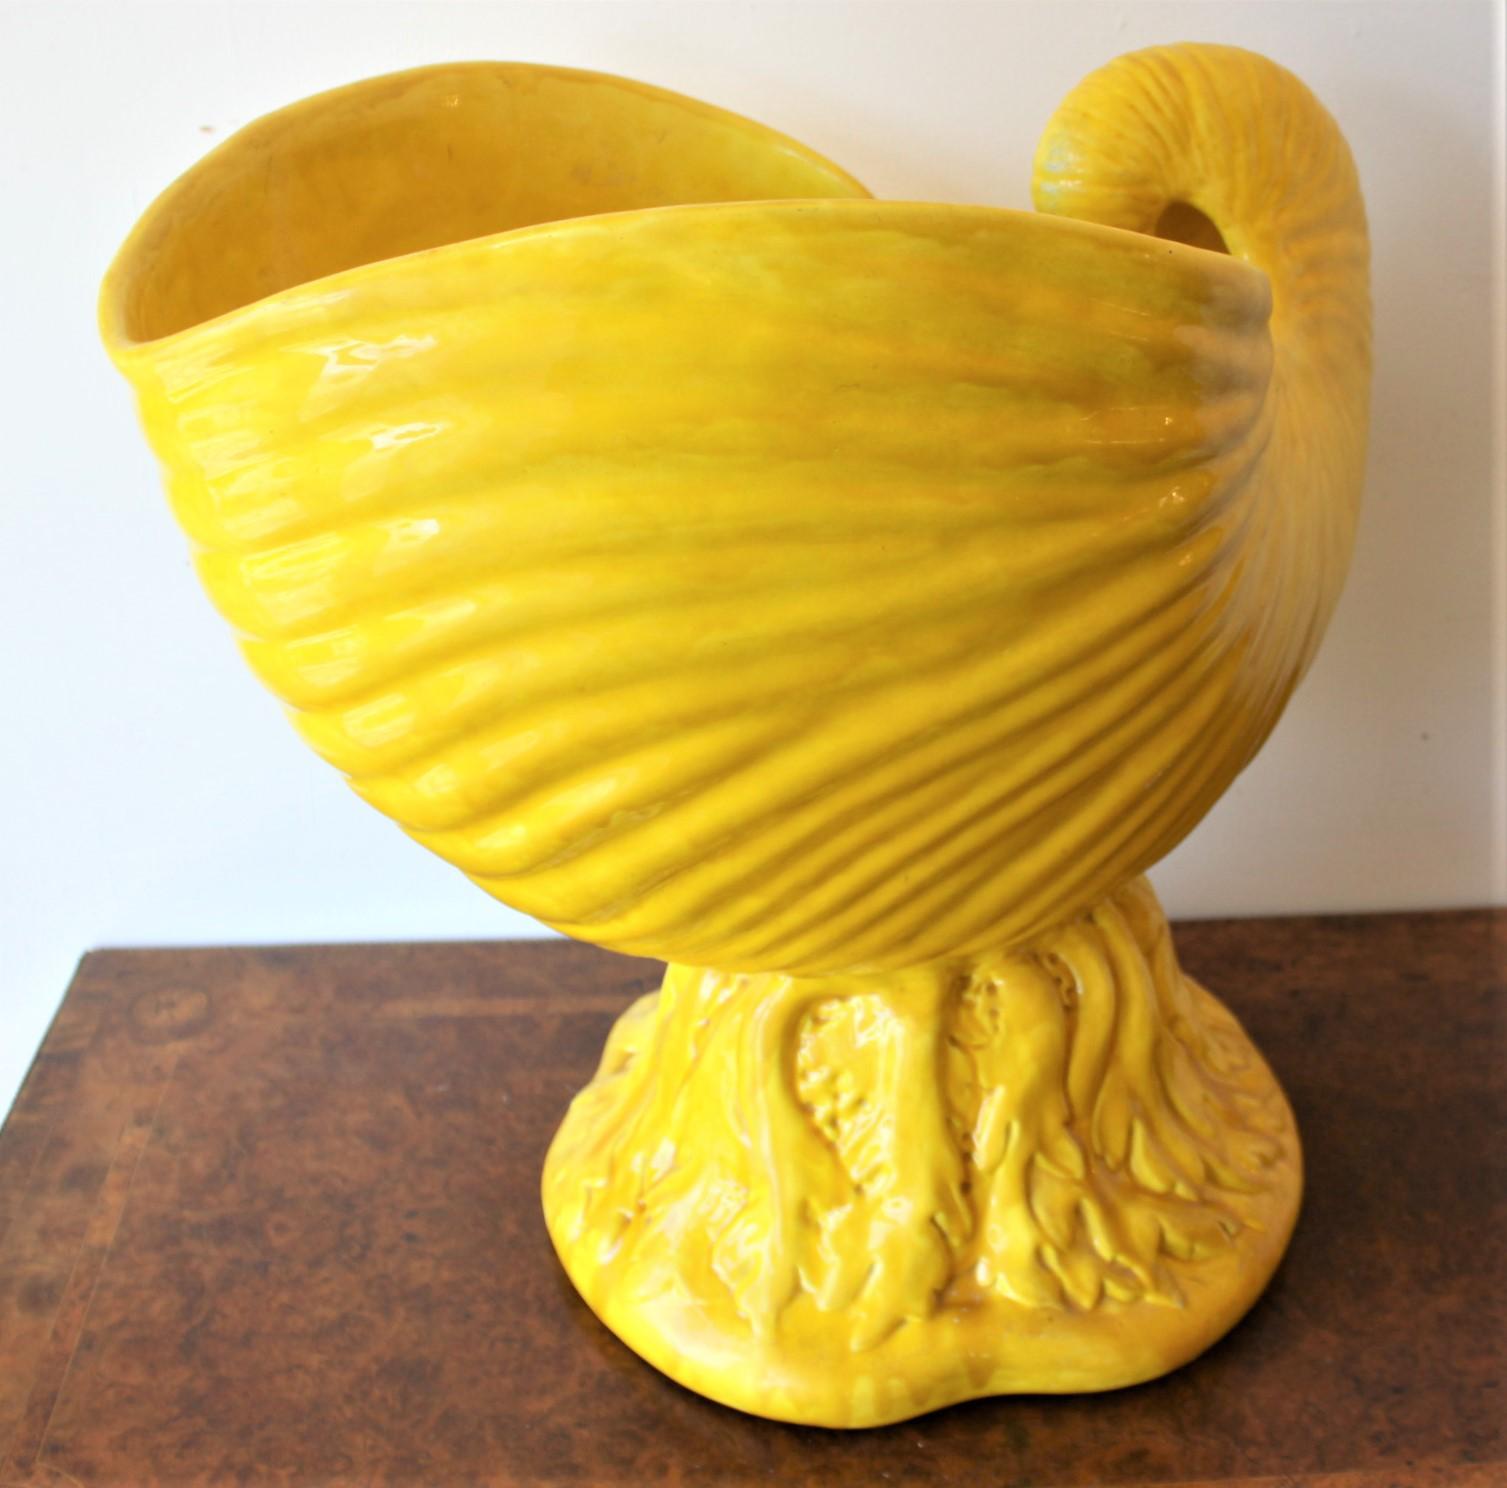 This enormous yellow majolica figural shell jardinière was made by the renowned Minton's factory of England in approximately 1850 in the period Victorian style. This large and substantial planter is done in a very vivid yellow with brown undertones